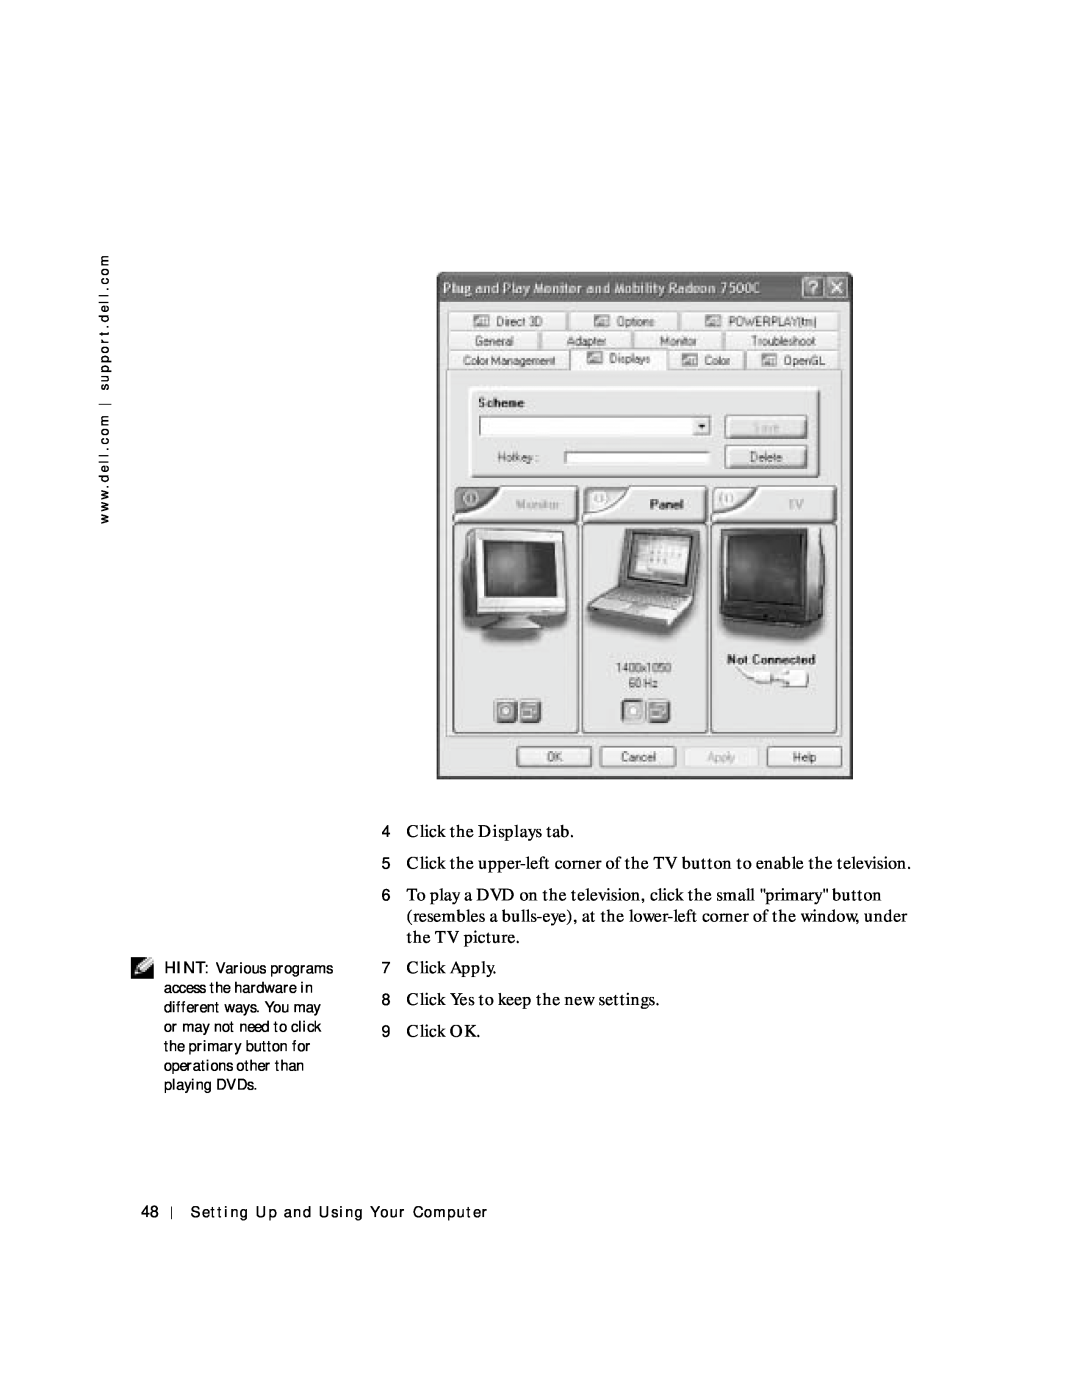 Dell 4150 owner manual Click the Displays tab 